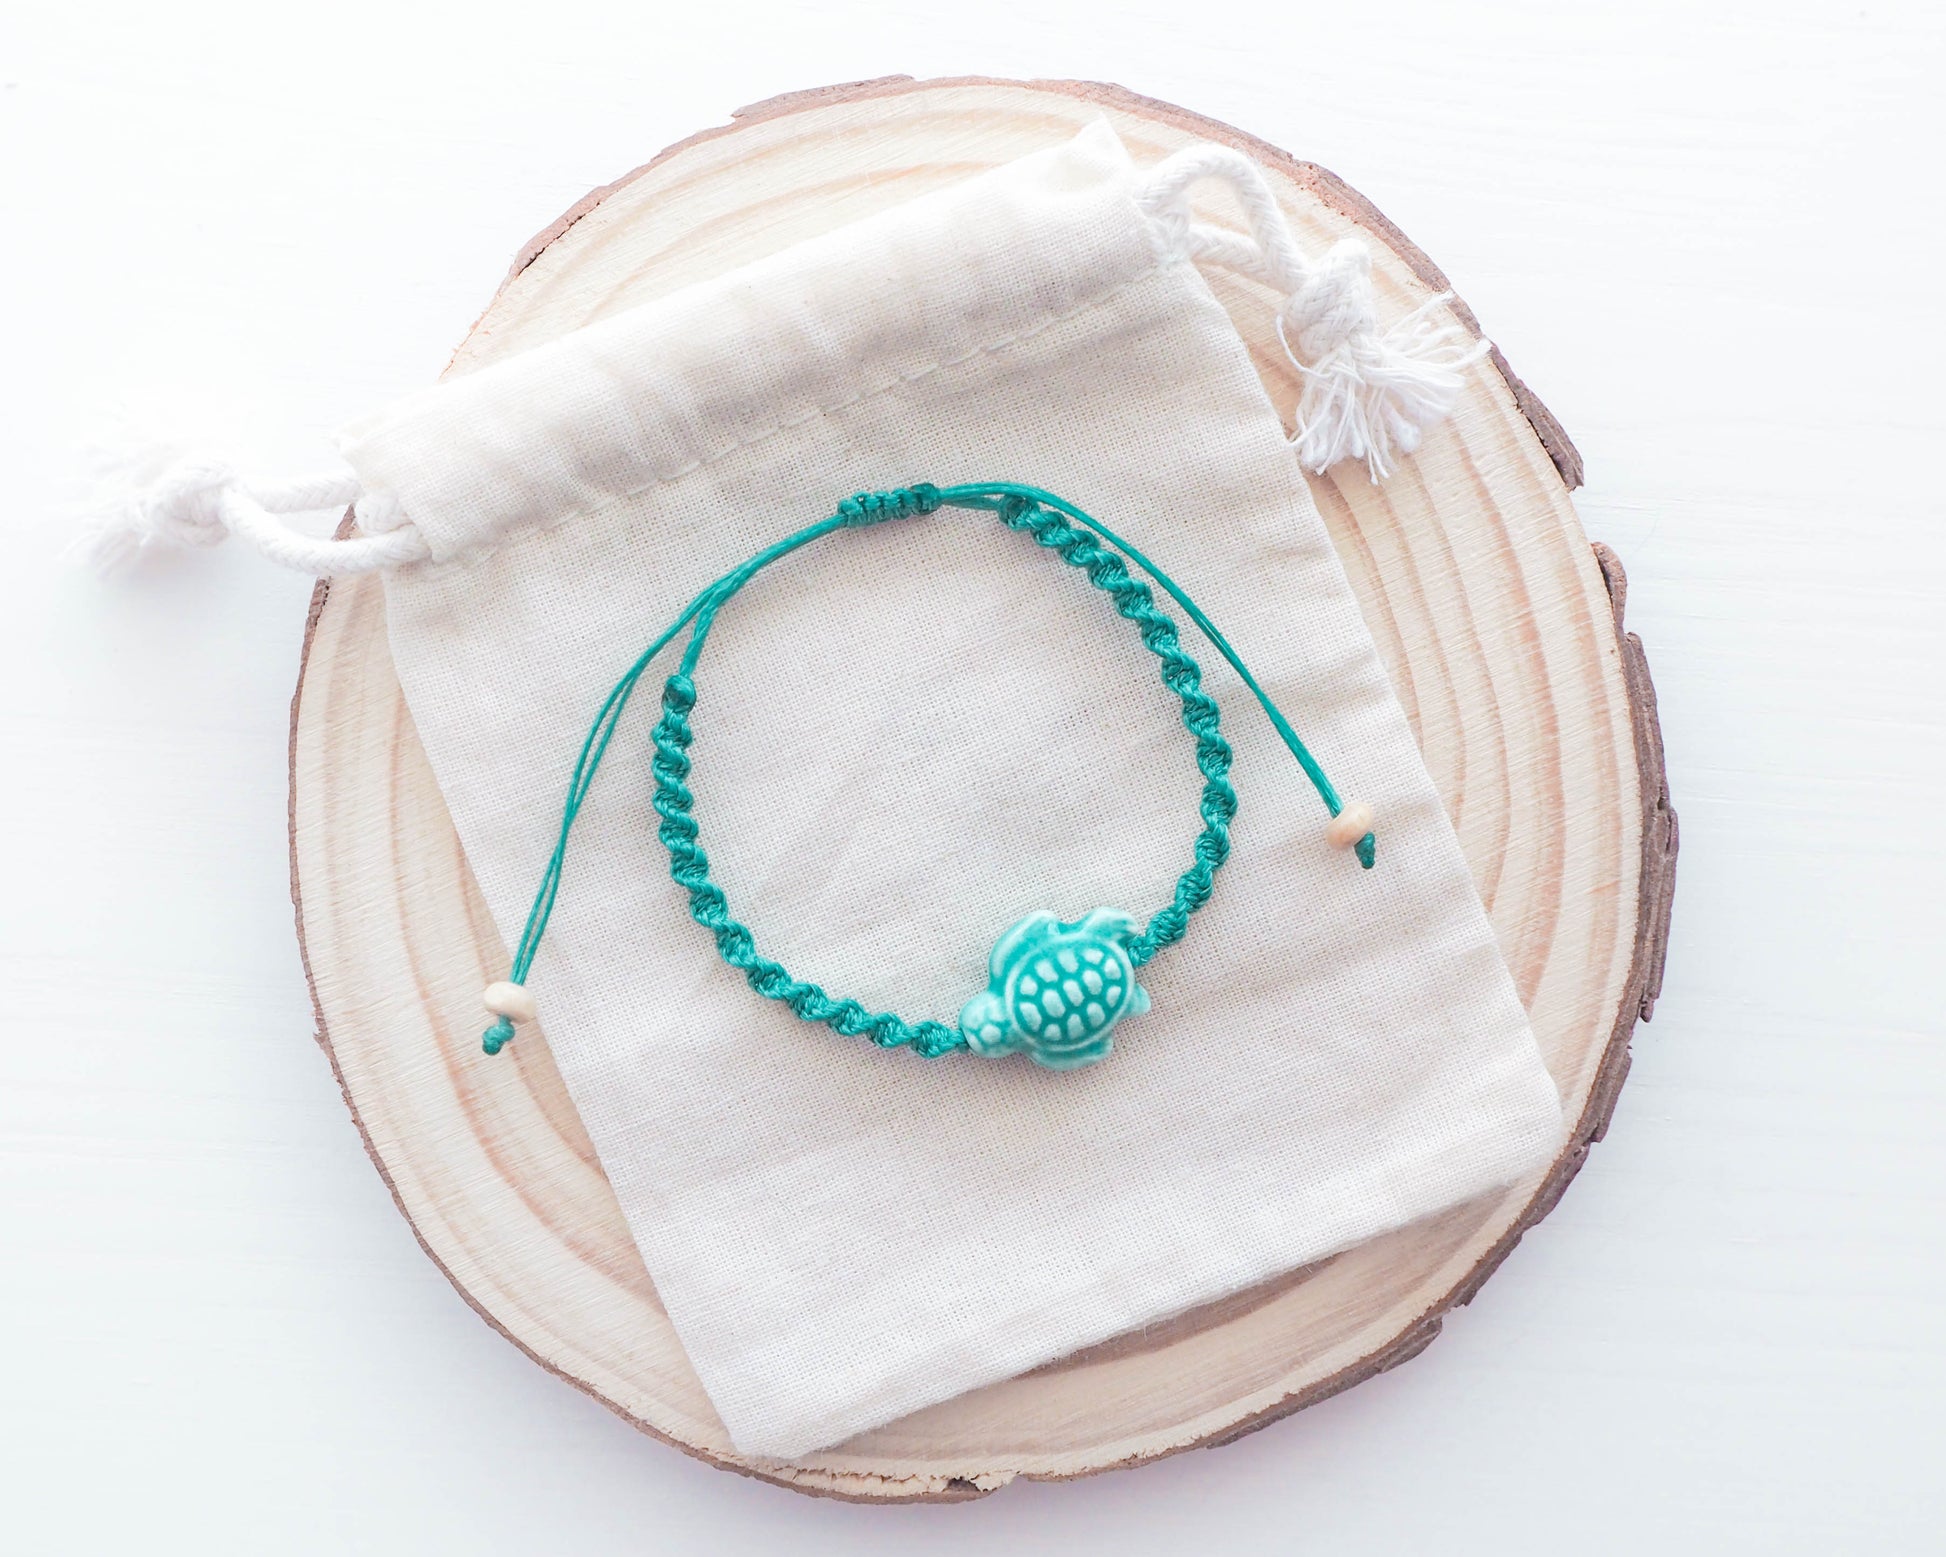 A high-resolution image showcasing the braided band of the Turquoise Green Ceramic Turtle Braided Bracelet. The band is earthy and textured, creating a harmonious contrast with the ceramic turtle